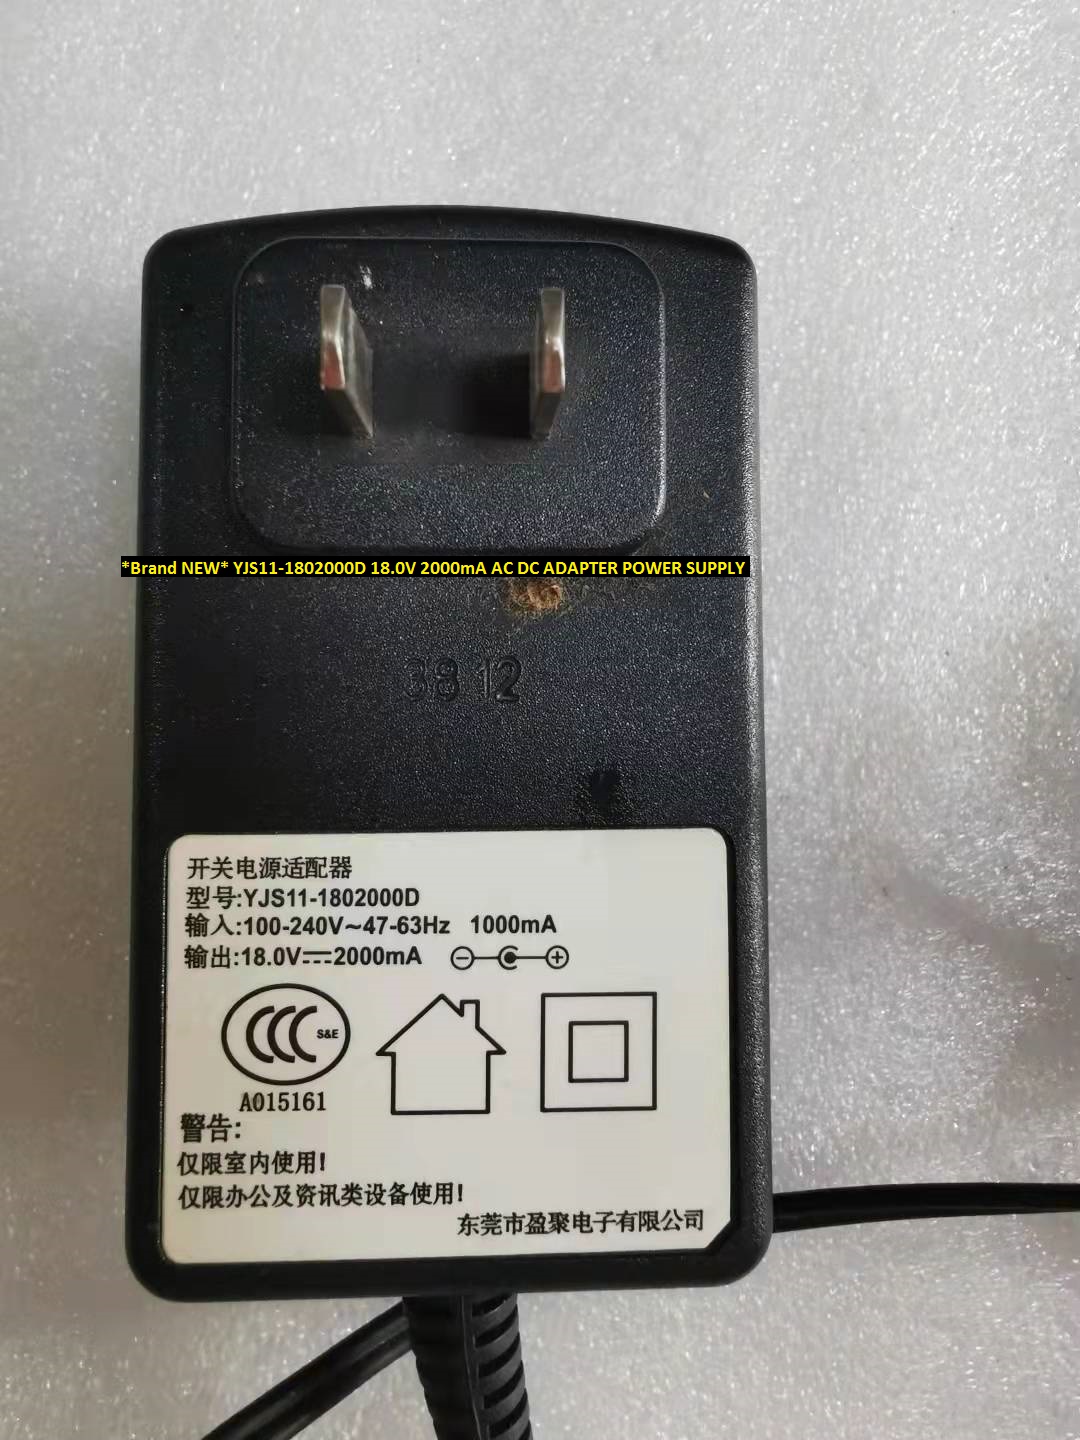 *Brand NEW* AC DC ADAPTER 18.0V 2000mA YJS11-1802000D POWER SUPPLY